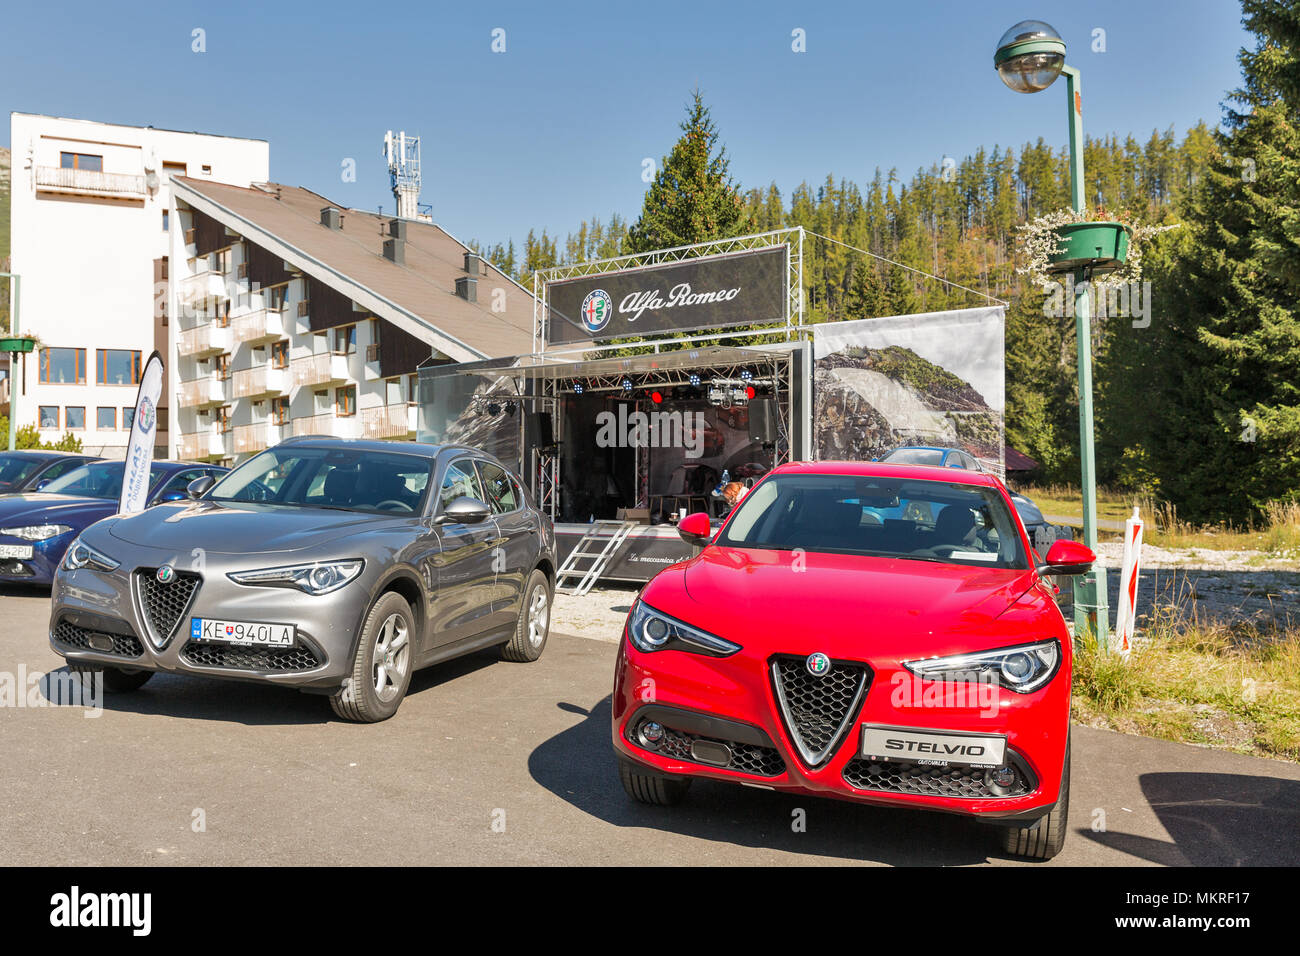 STRBSKE PLESO, SLOVAKIA - OCTOBER 01, 2017: Alfa Romeo advertising stand. It is Italian car manufacturer known for sporty vehicles, a subsidiary of Fi Stock Photo